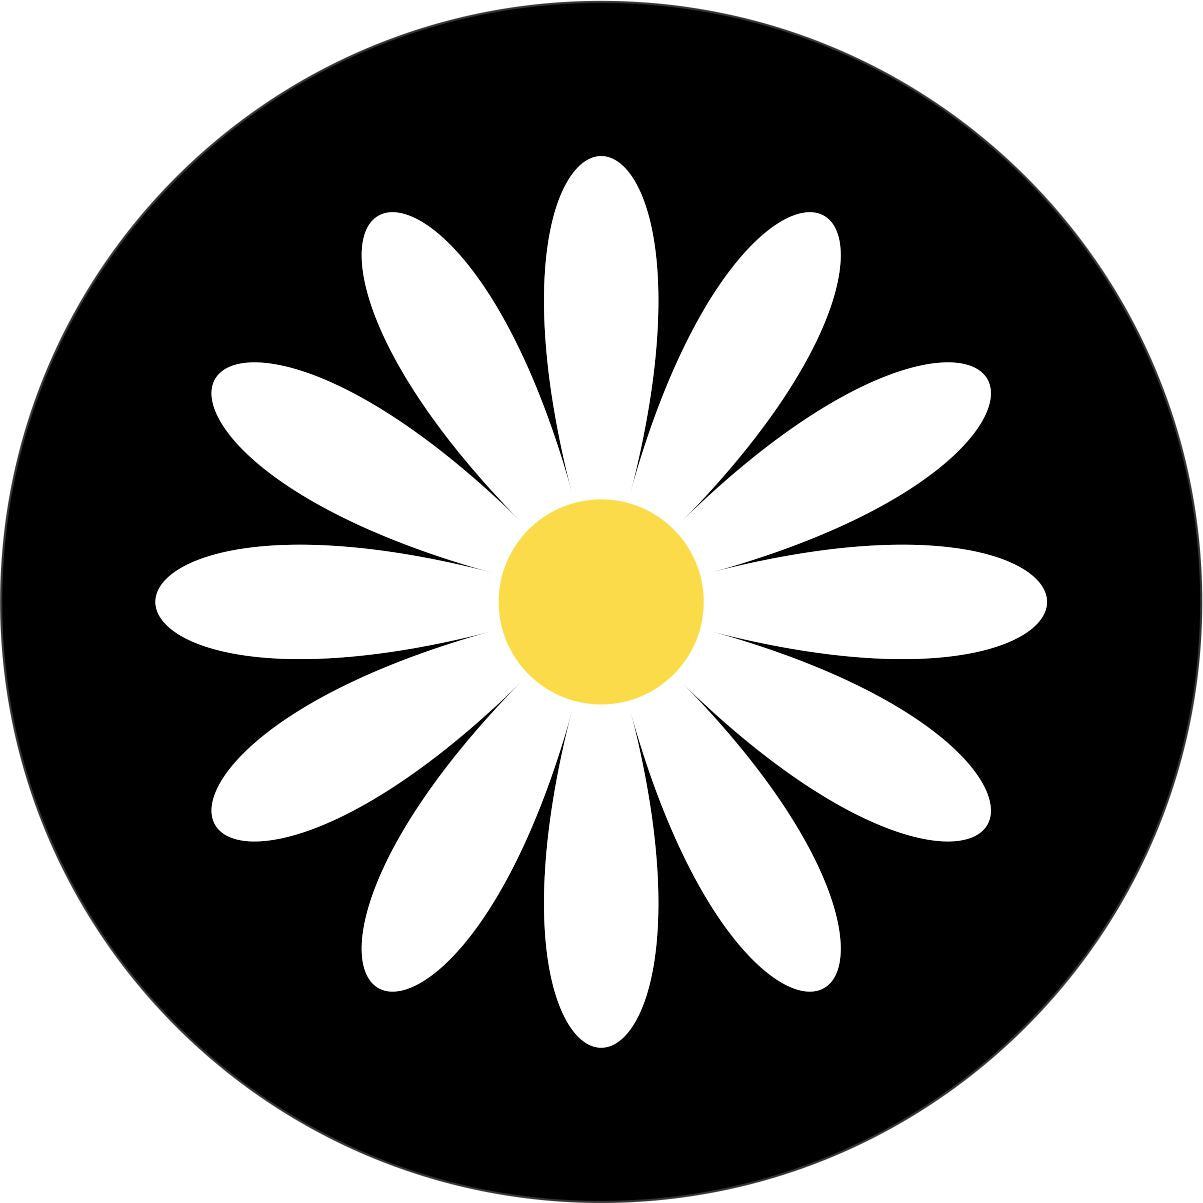 Black vinyl spare tire cover with a white daisy and yellow center. Simple spare tire cover design of a plain two color daisy.